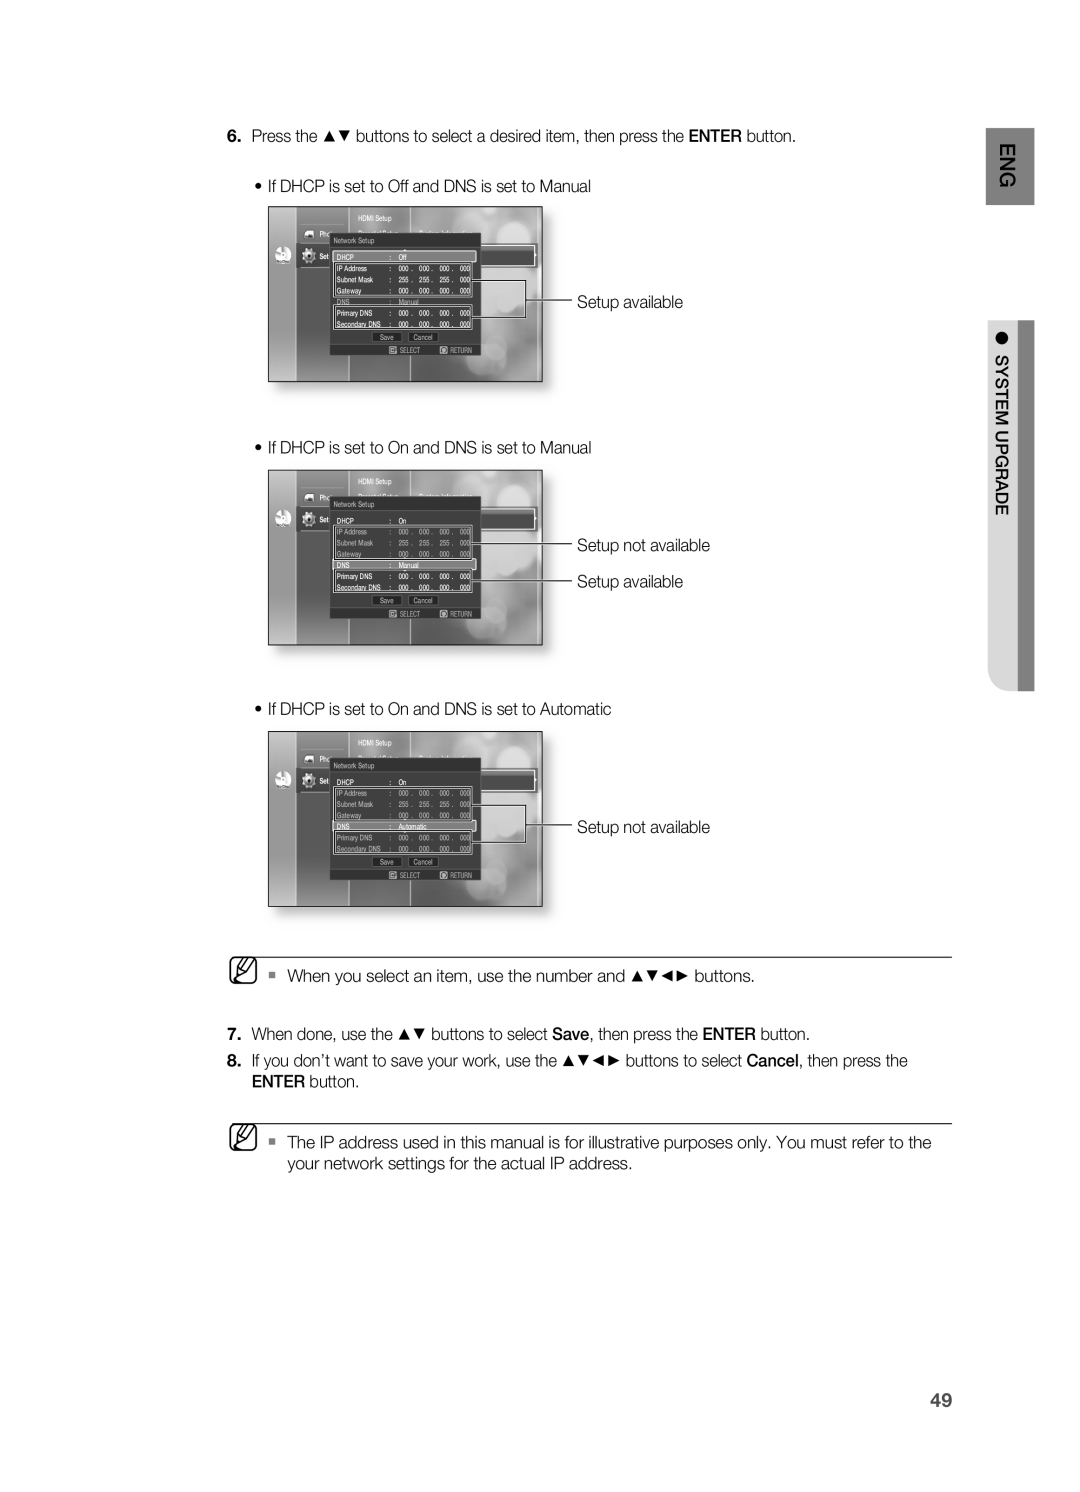 Samsung HT-BD2 manual •If DHCP is set to Off and DNS is set to Manual 